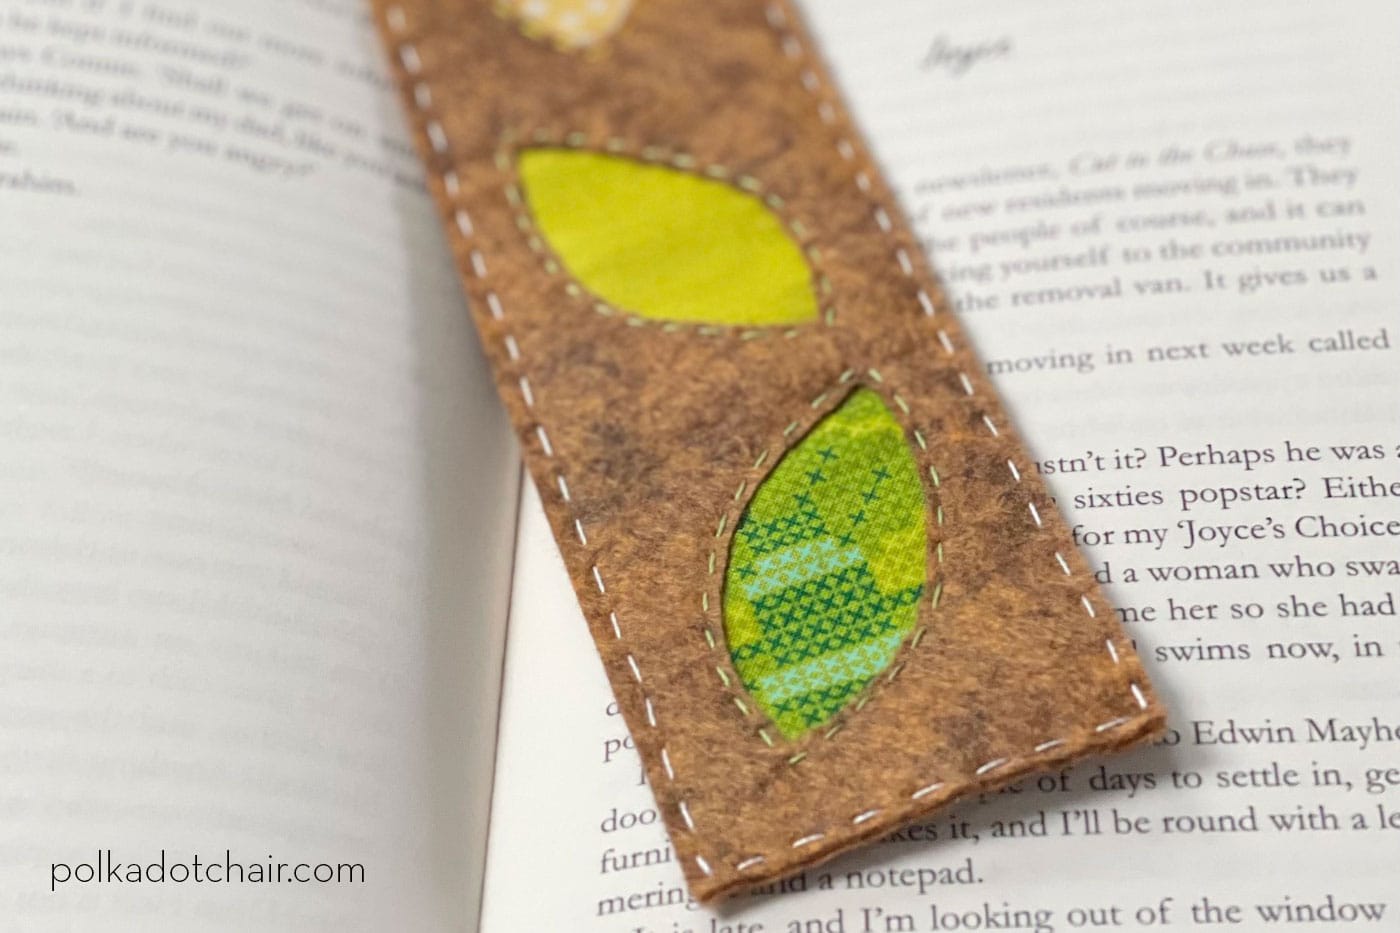 brown, green and yellow bookmark on book in room with plants